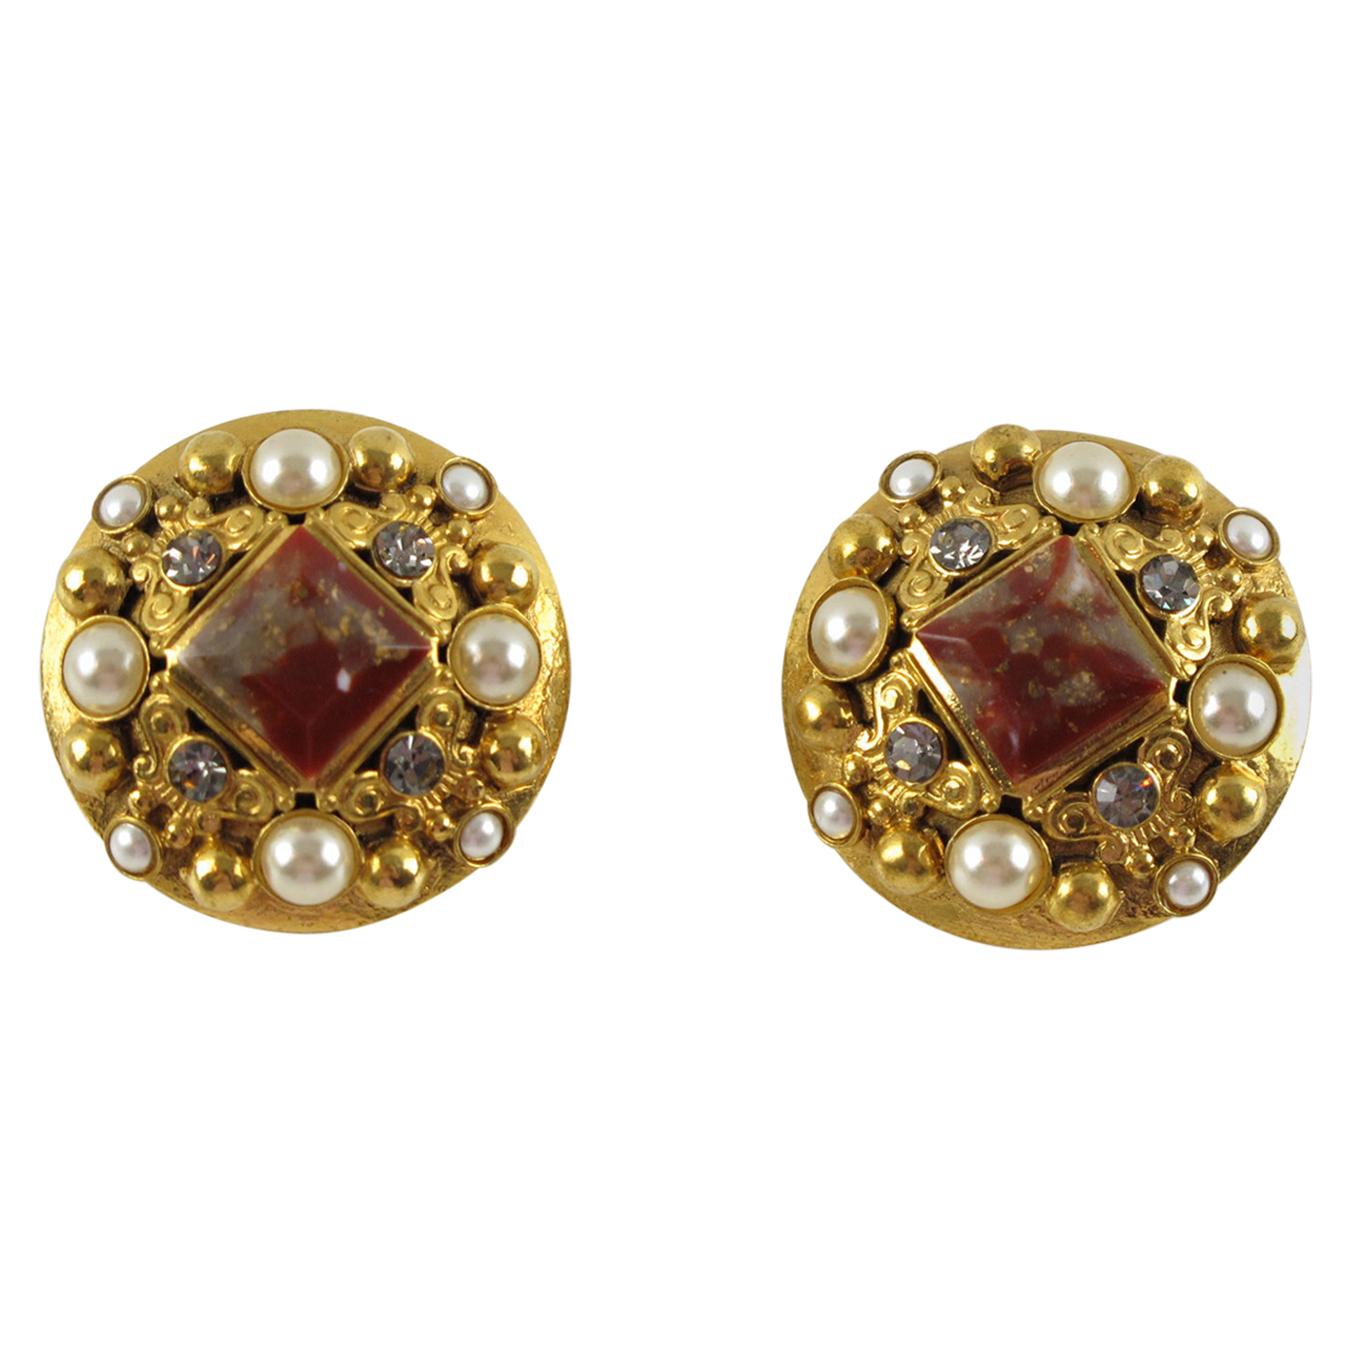 Henry Perichon Gilt Metal Jeweled Clip Earrings For Sale